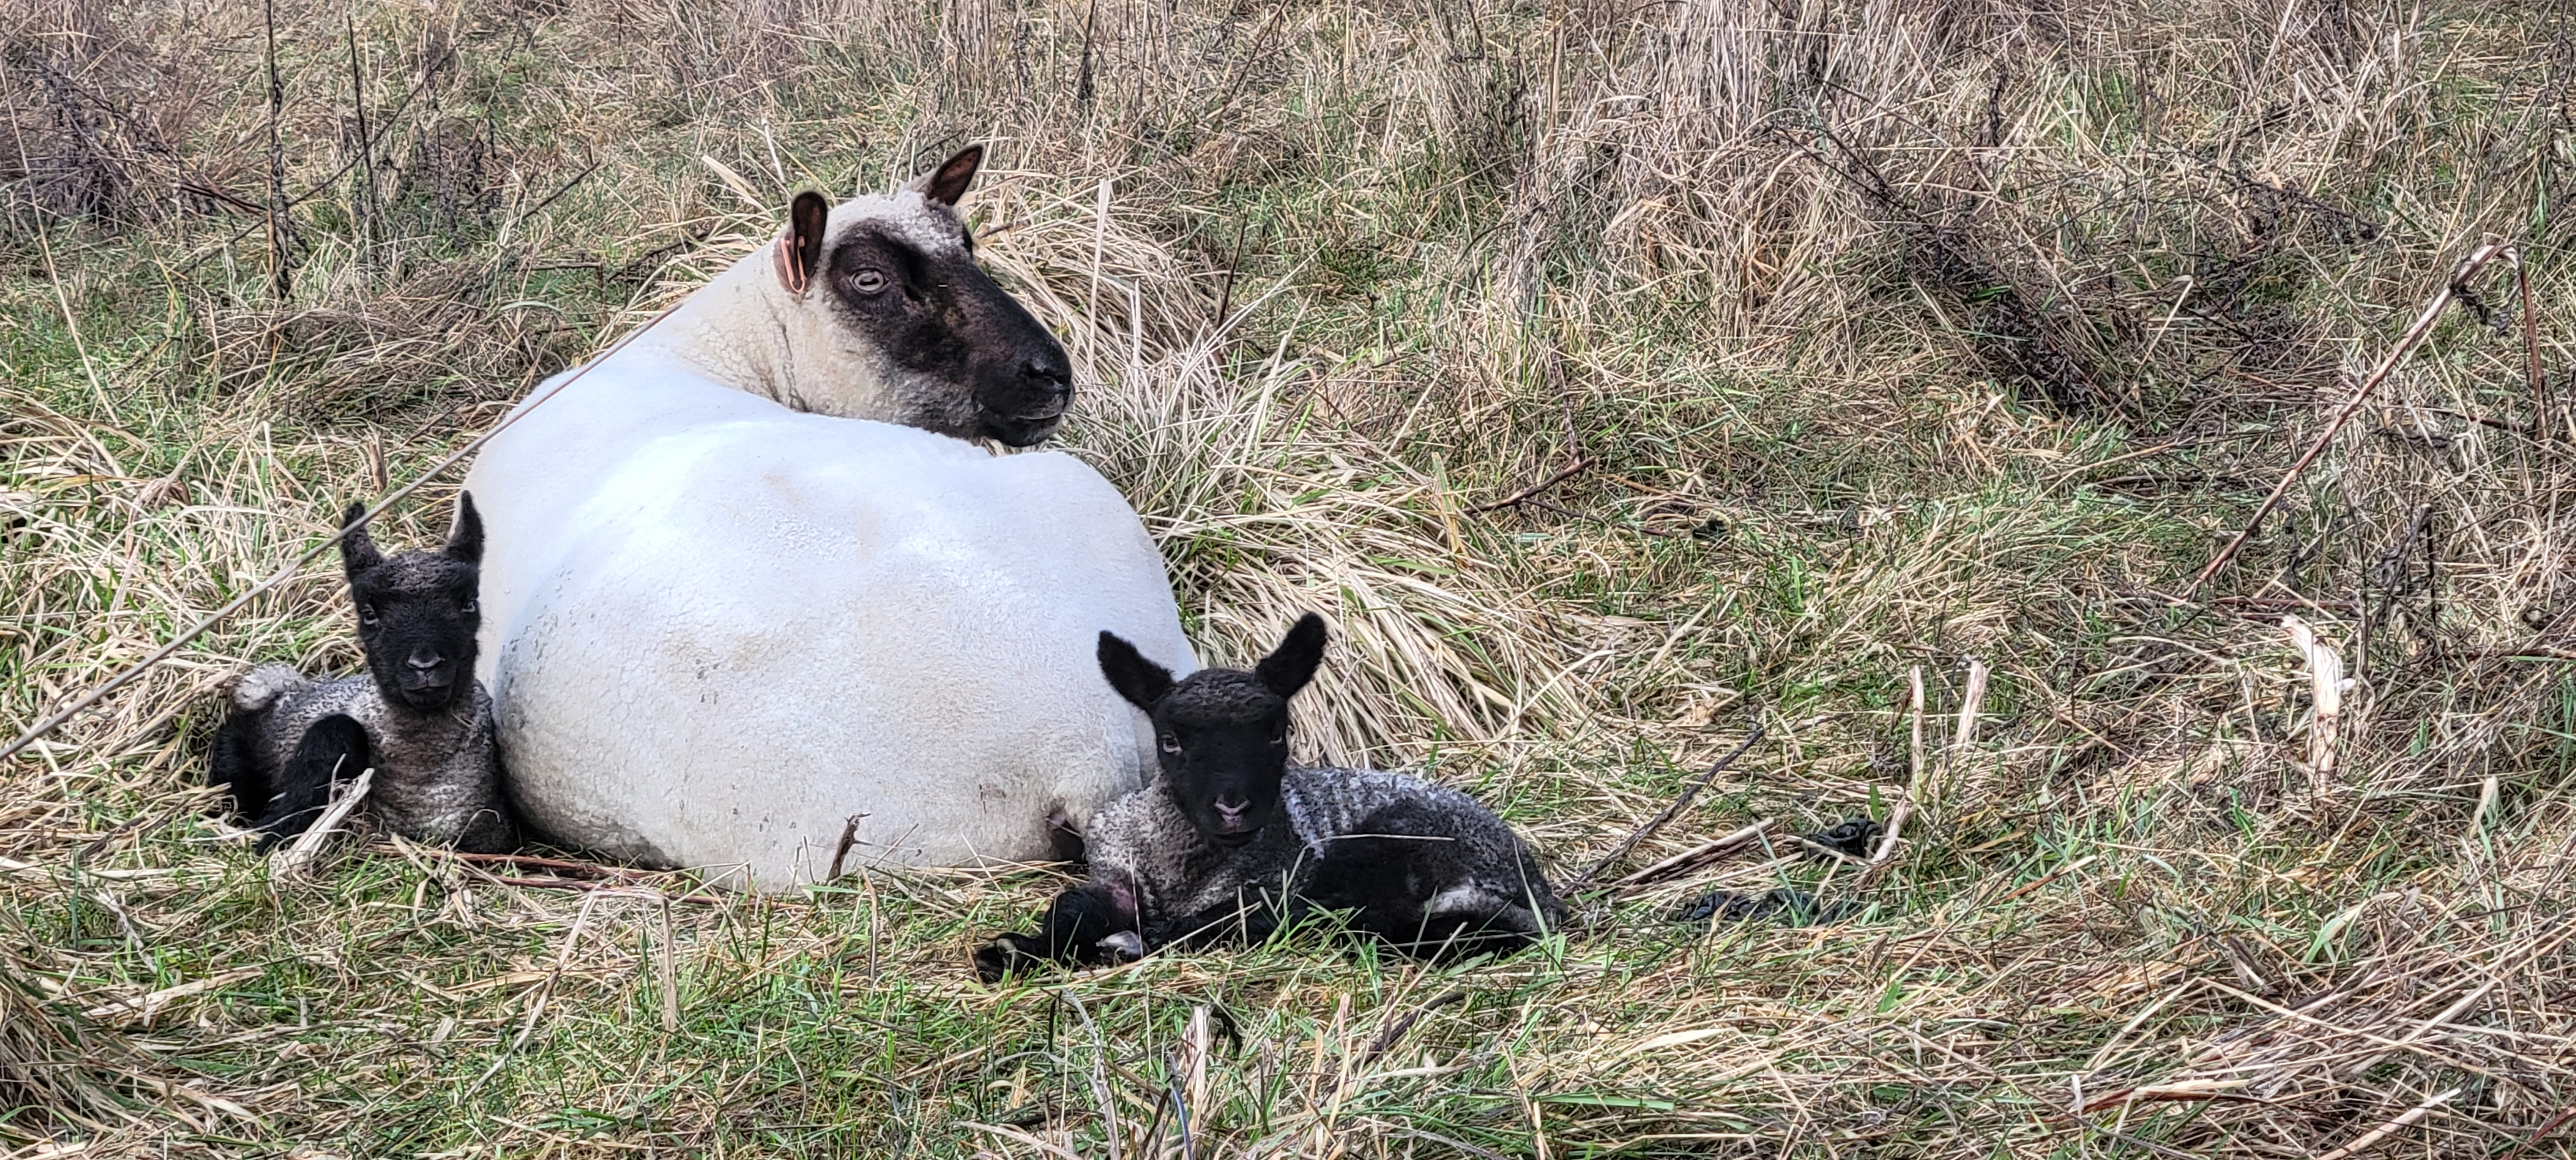 Image unrelated to post. A mama sheep with two babies curled up next to her in a grassy field.